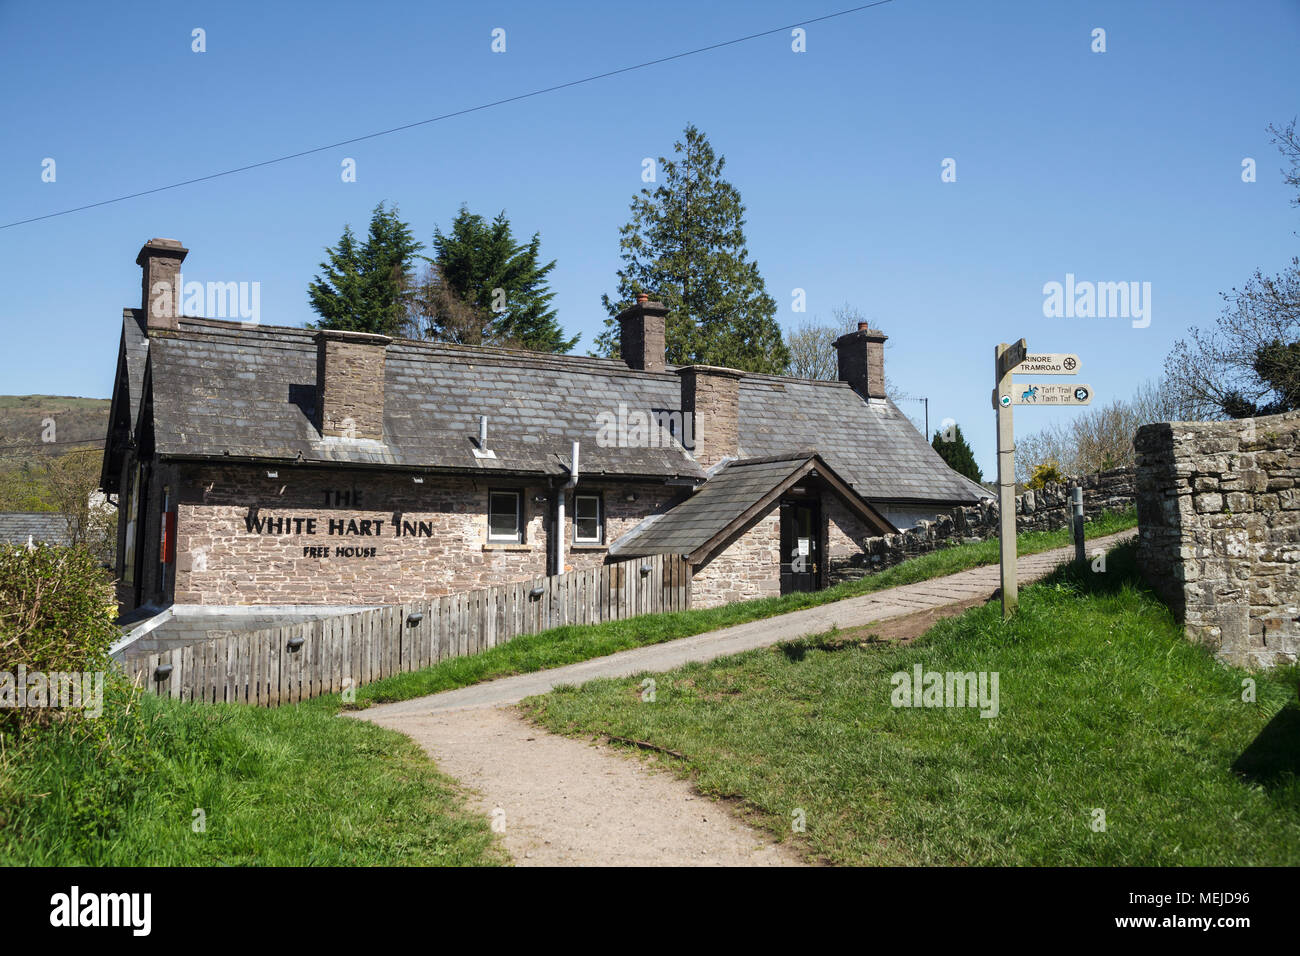 The White Hart Inn on the Brecon Monmouth canal at Talybont on Usk Brecon Beacons Stock Photo